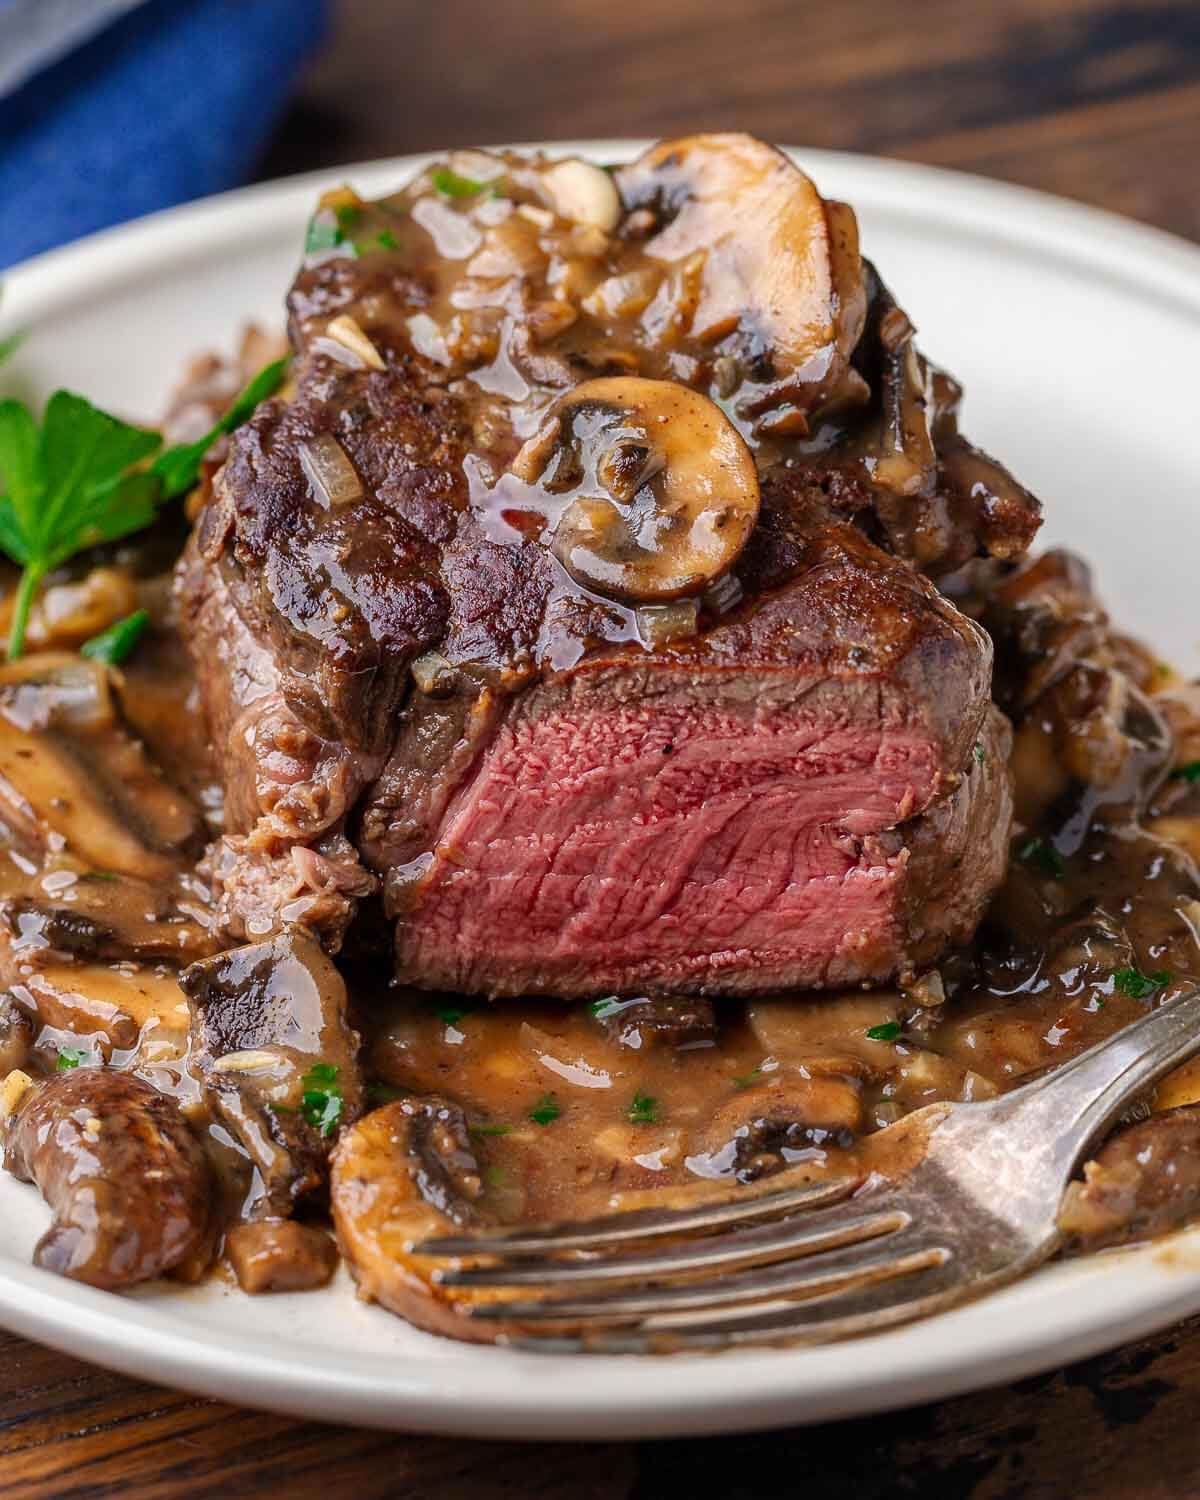 One large filet mignon cut into with mushroom sauce.